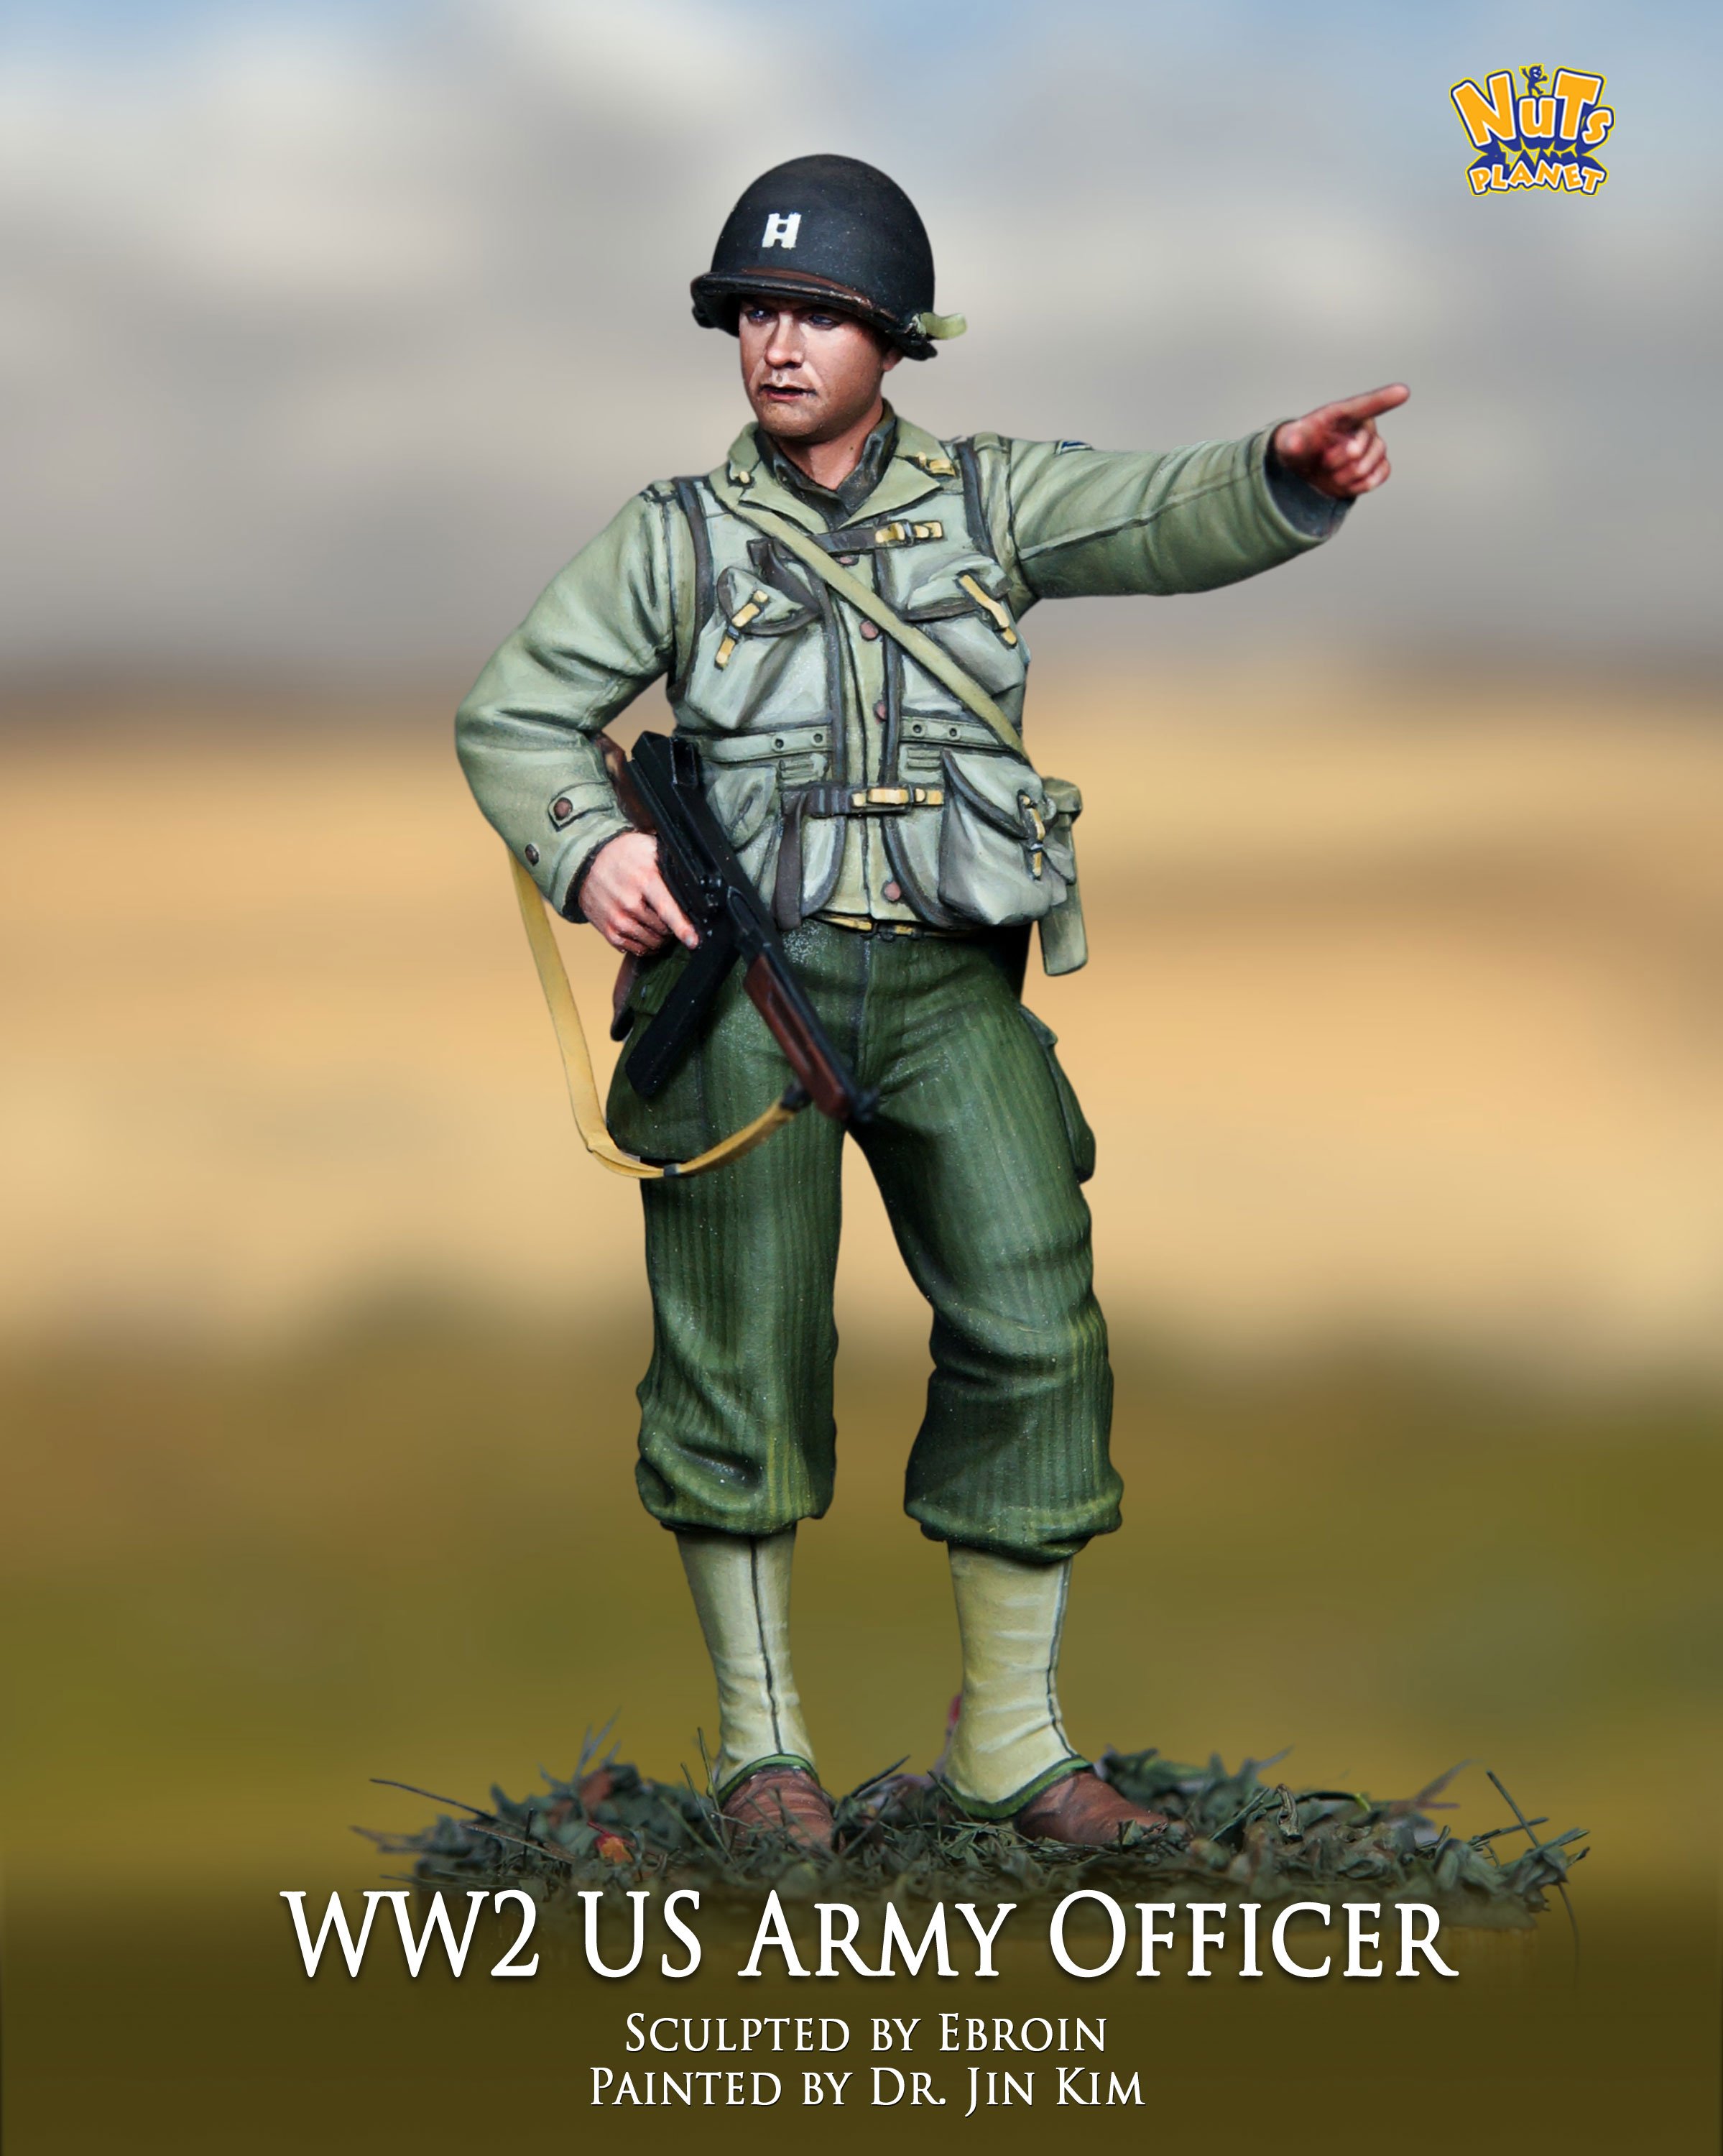 1/35 WWII US Army Officer - Click Image to Close